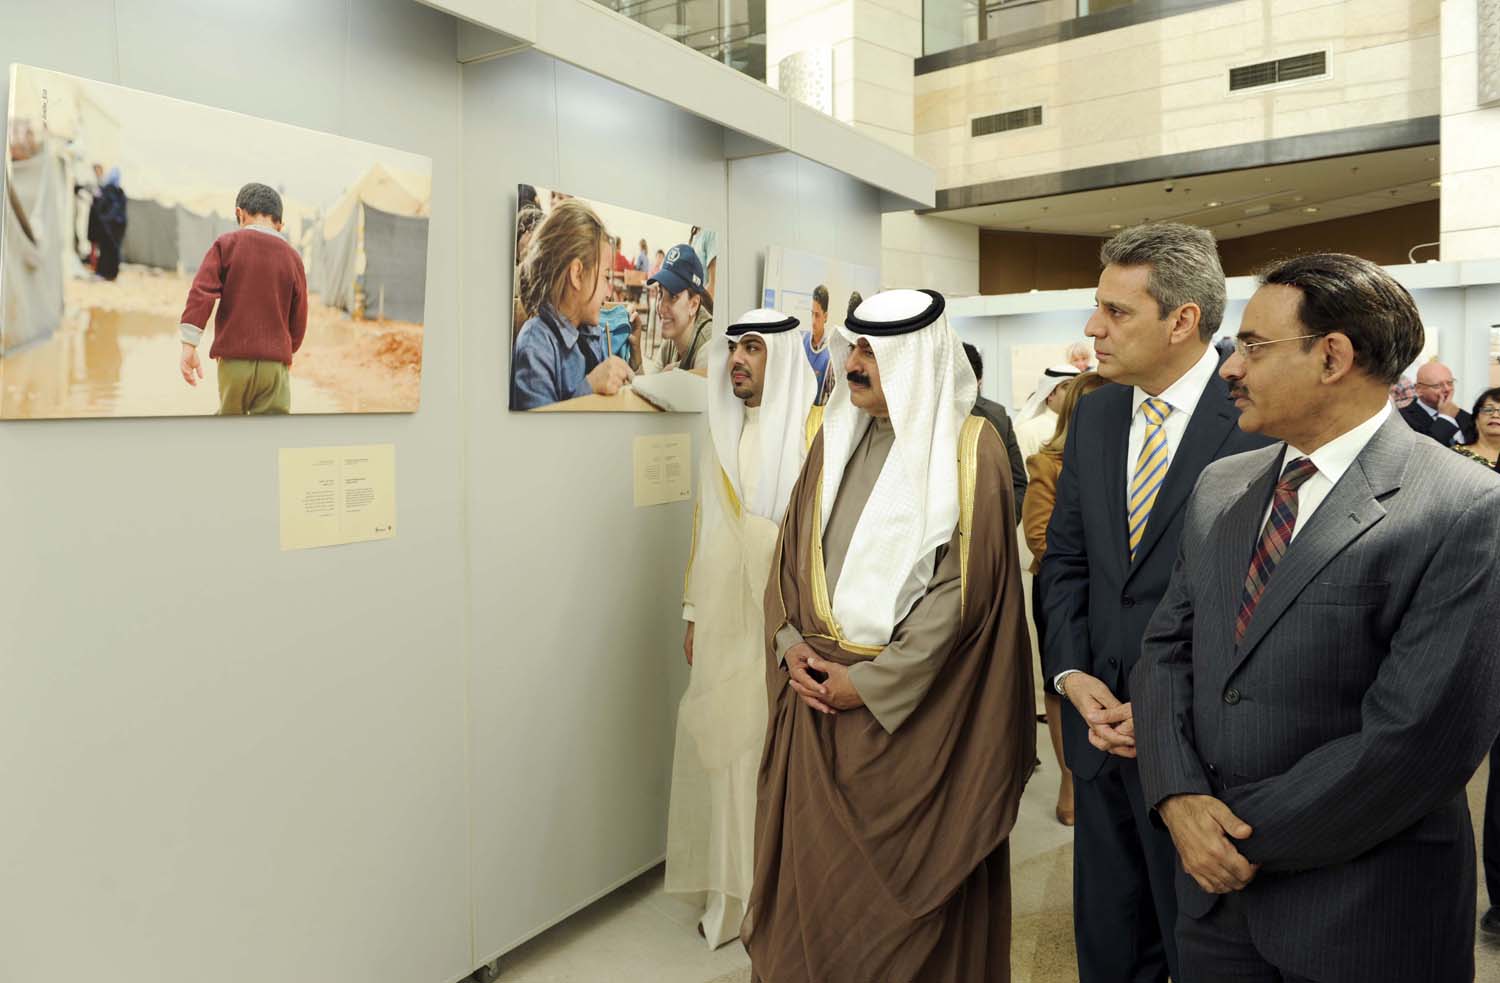 Foreign Ministry Undersecretary Khaled Al-Jarallah inagurates a photo exhibition organized here by the UN World Food Programme (WFP)